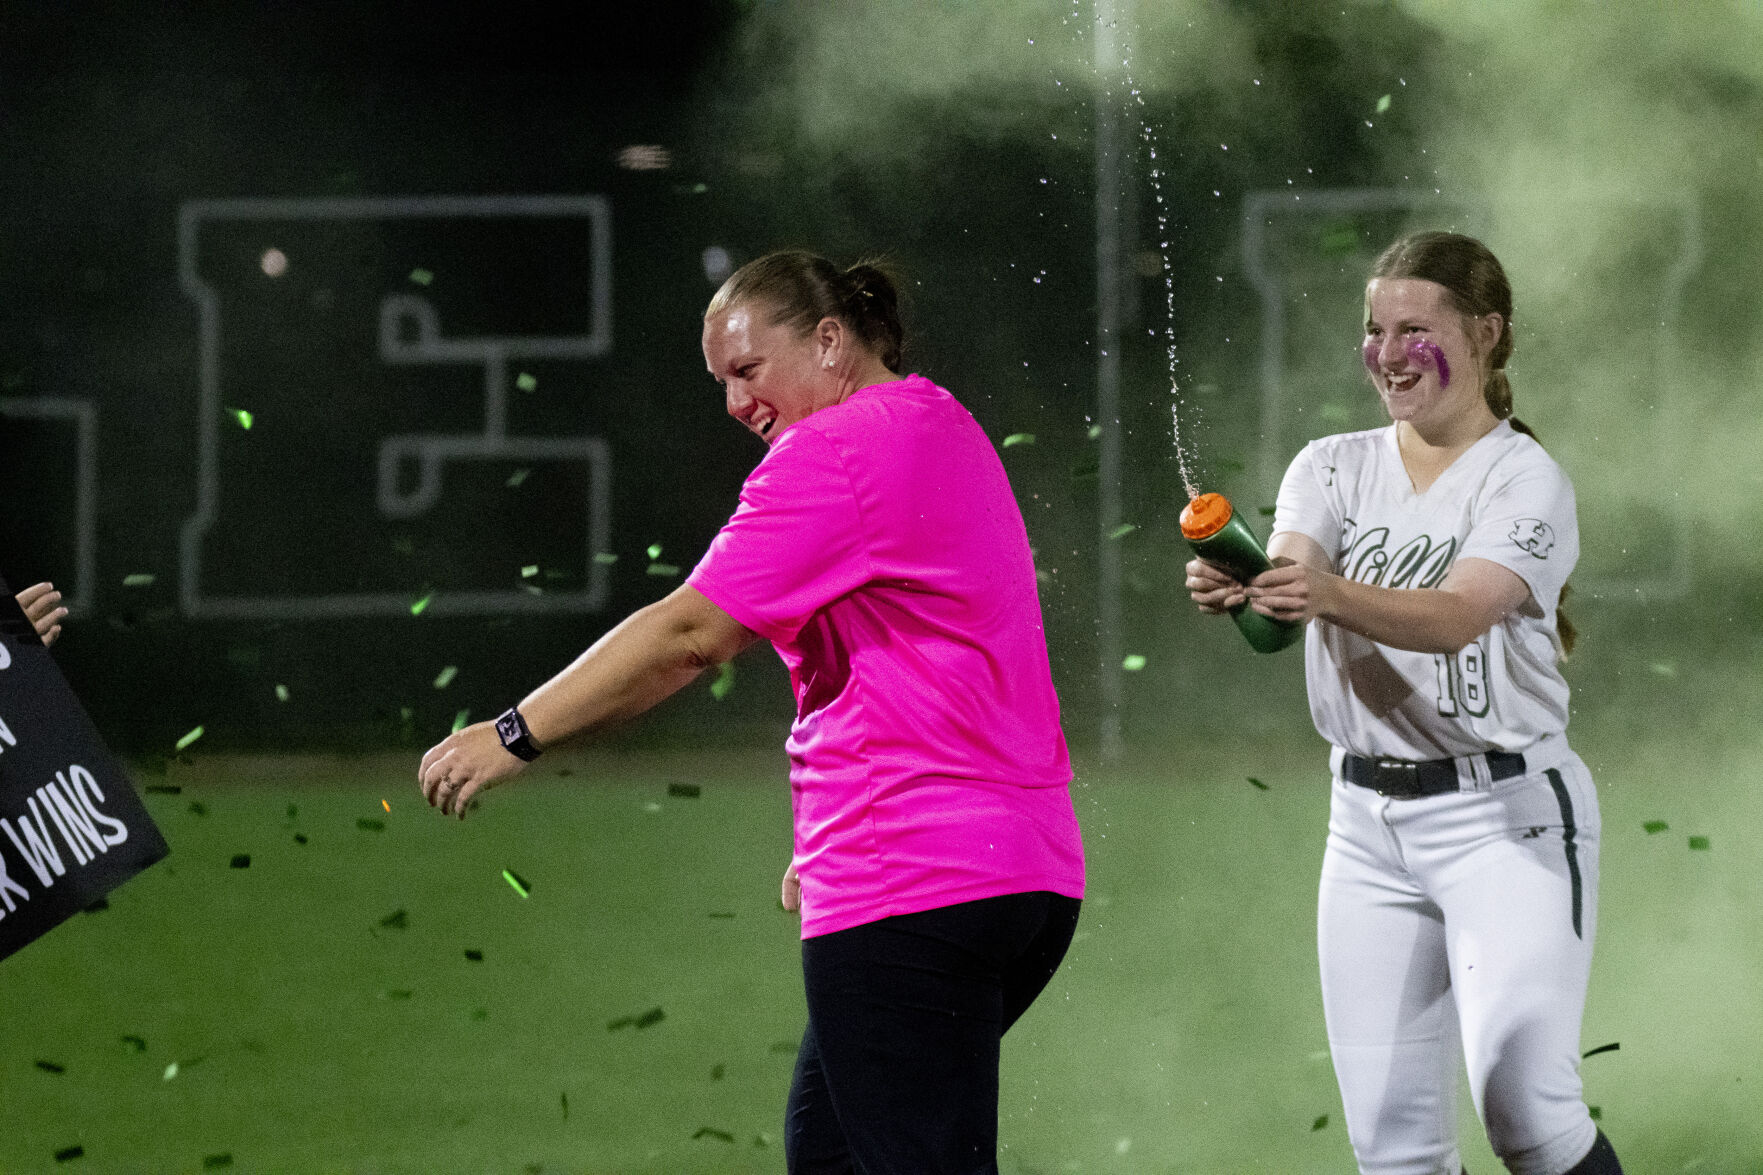 Lady Hornets Secure 5-0 Victory and Coach Bryan Hits 200th Win Milestone